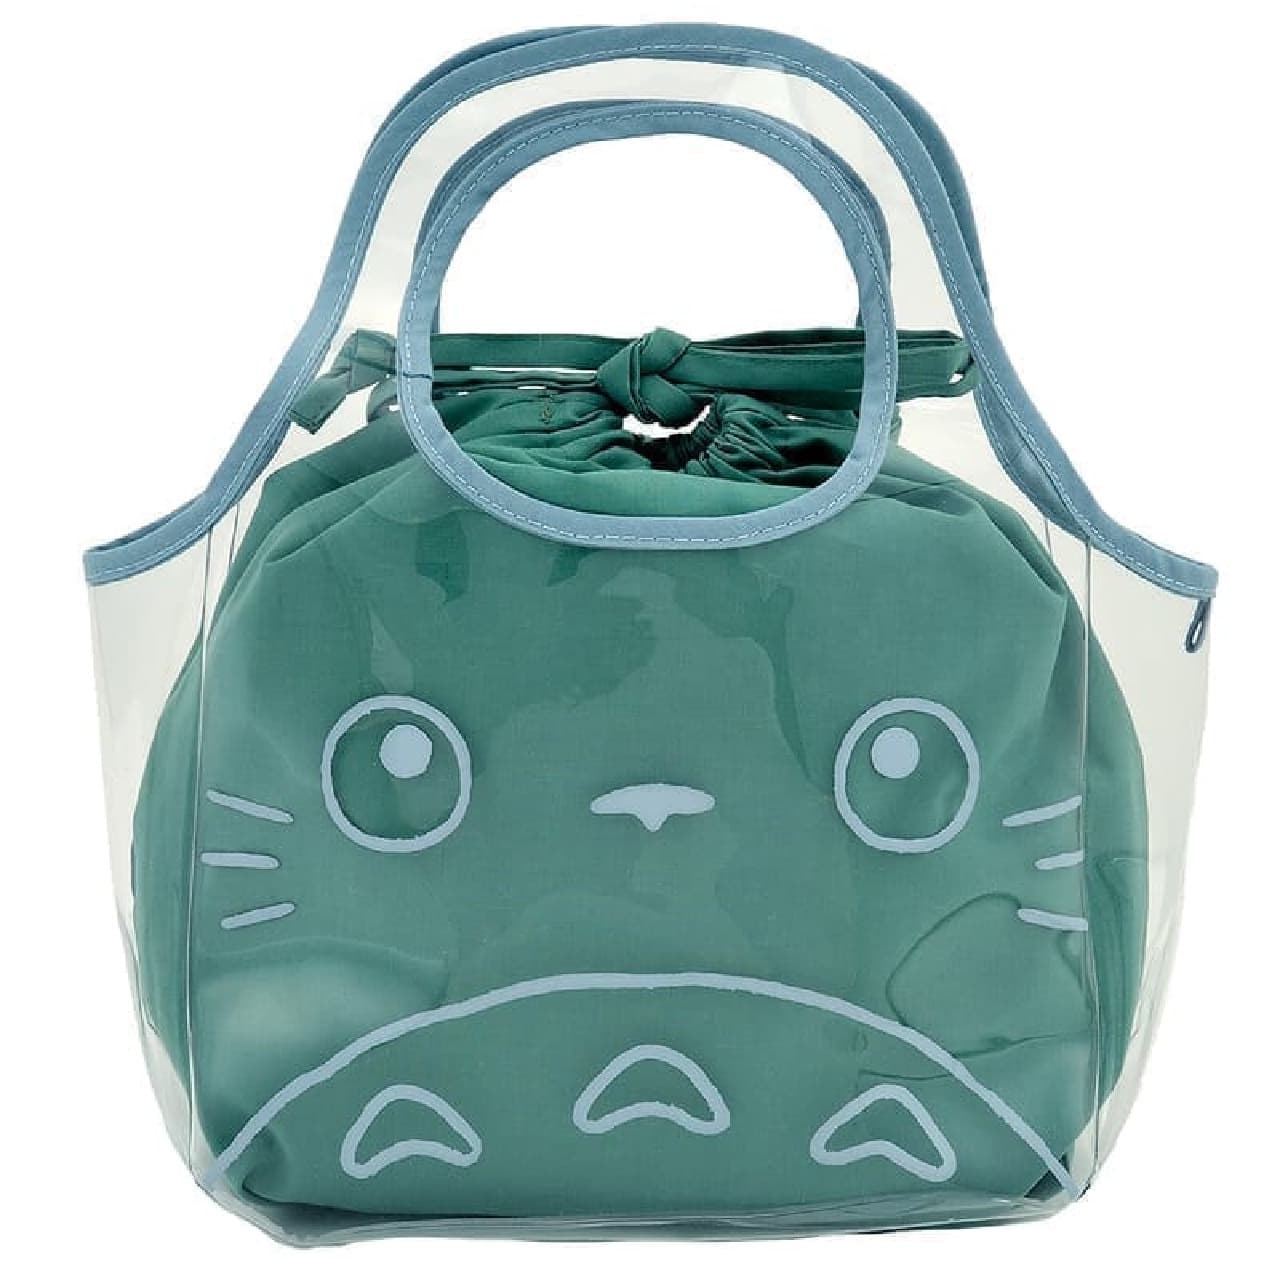 "My Neighbor Totoro" clear bag and drawstring purse